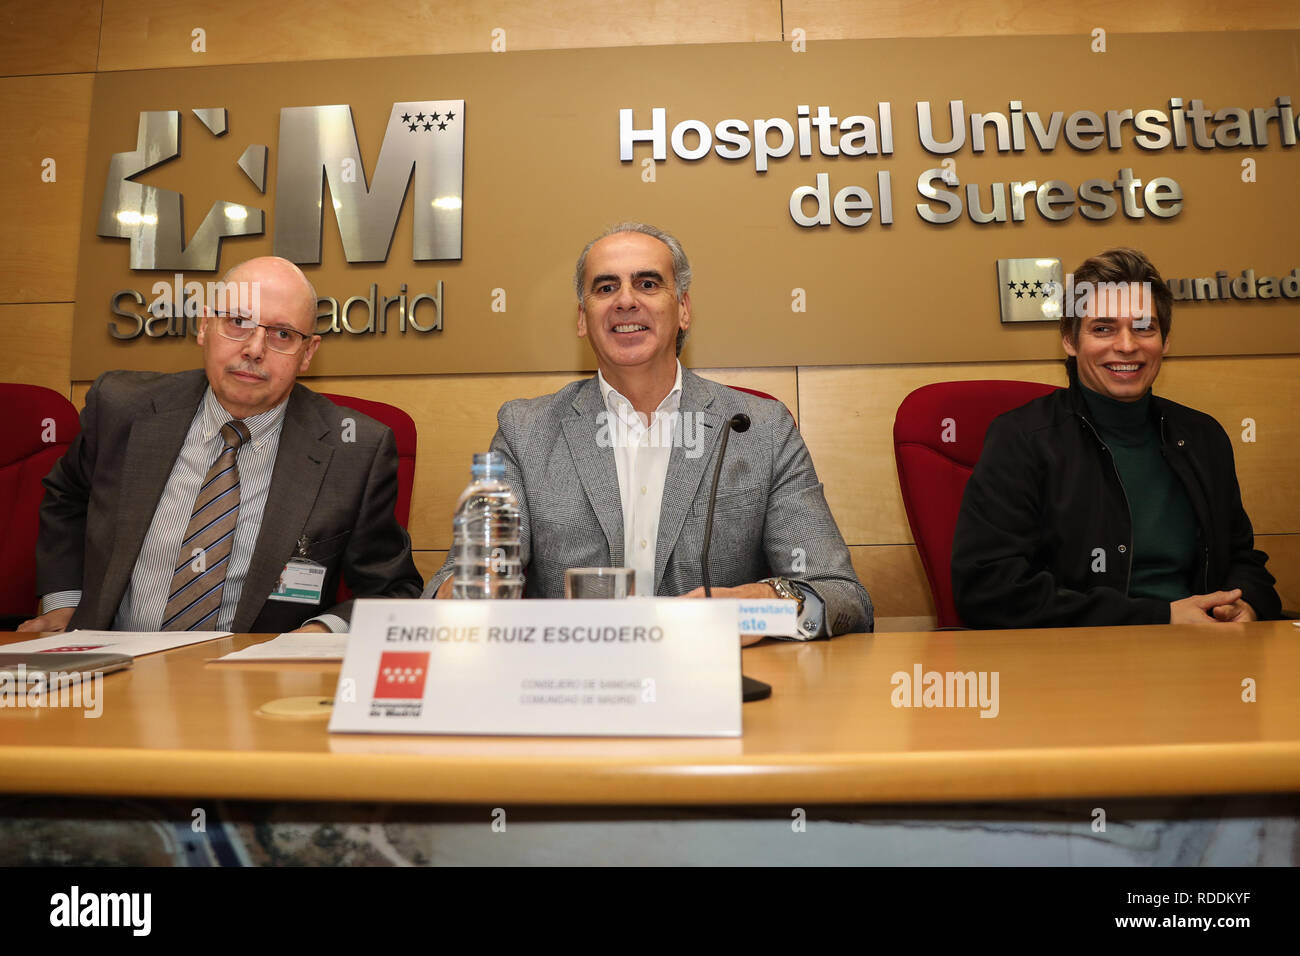 Madrid, Spain. 18th January, 2019. Carlos Sangregorio(l), Managing Director University Hospital of the Southeast, Enrique Ruiz Escudero(c), Health Minister of the Community of Madrid and Carlos Baute(r), Venezuelan singer and president of the NGO 'A medicine for Venezuela' attending the act. The Councilor for Health of the Community of Madrid, Enrique Ruiz Escudero, accompanied by the ambassador of the NGO 'A medicine for Venezuela', the Venezuelan singer Carlos Baute, and the director of the Association, Vanessa Pineda, assist in the donation of sanitary material performed by the University H Stock Photo